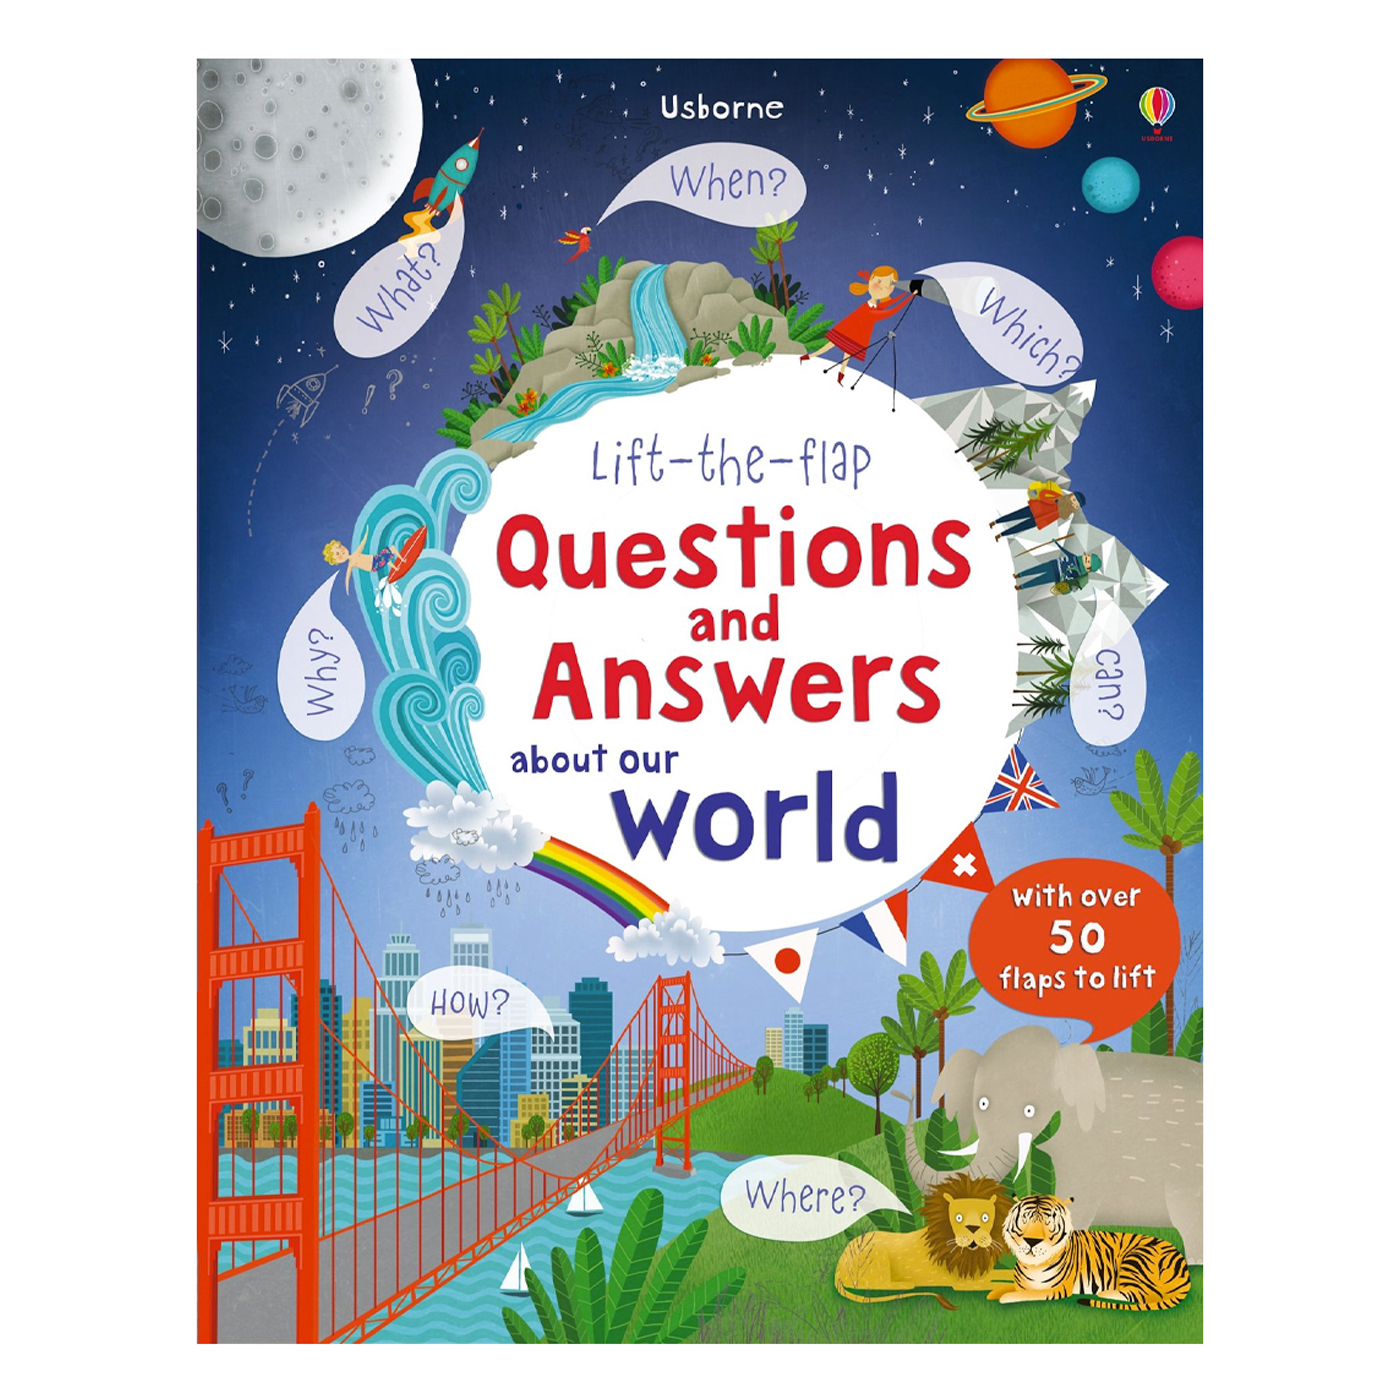  Lift-the-flap Questions and Answers World